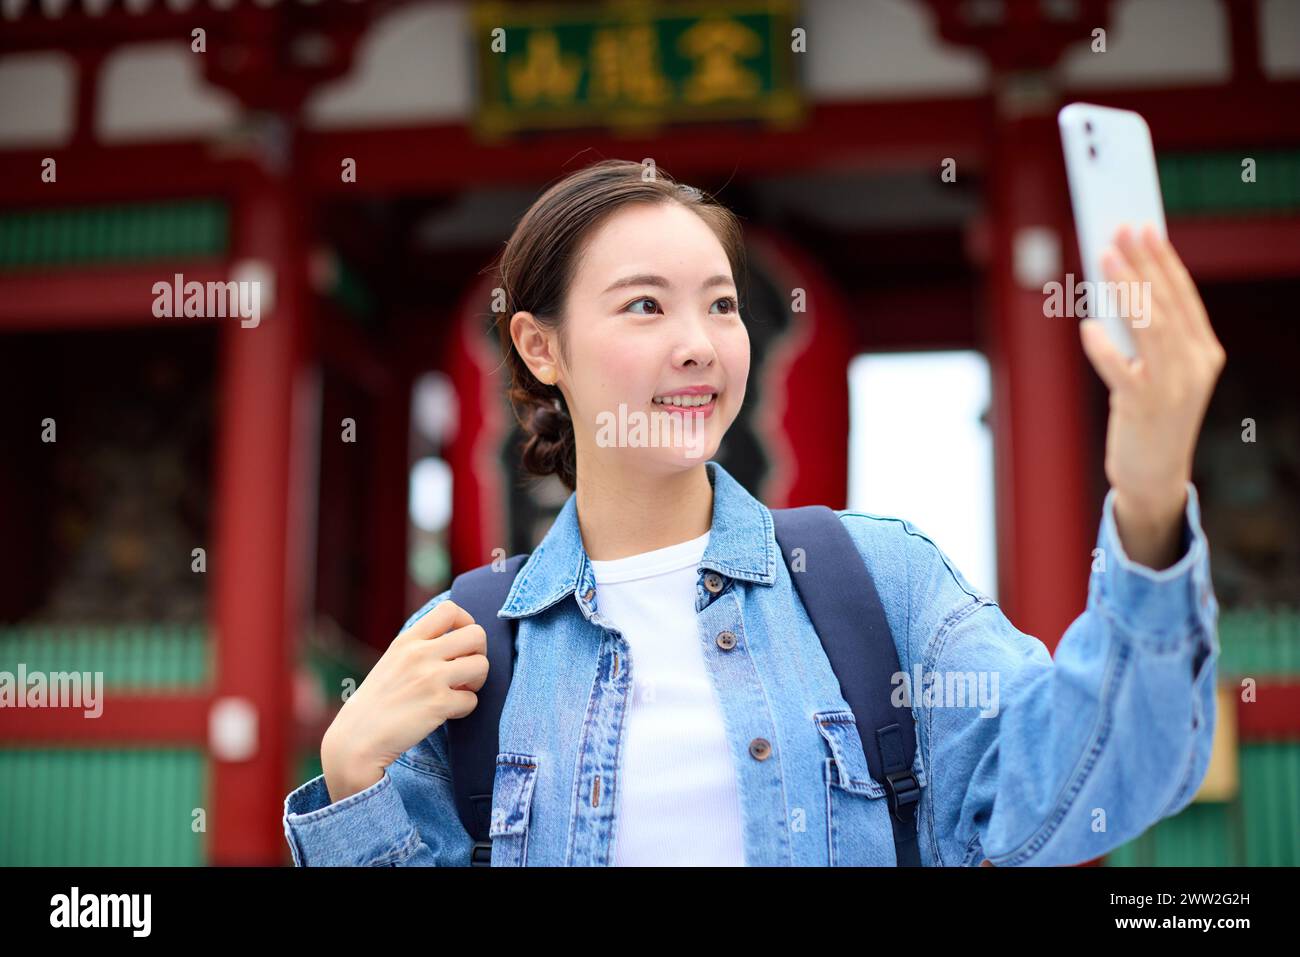 A woman taking a selfie with her phone Stock Photo